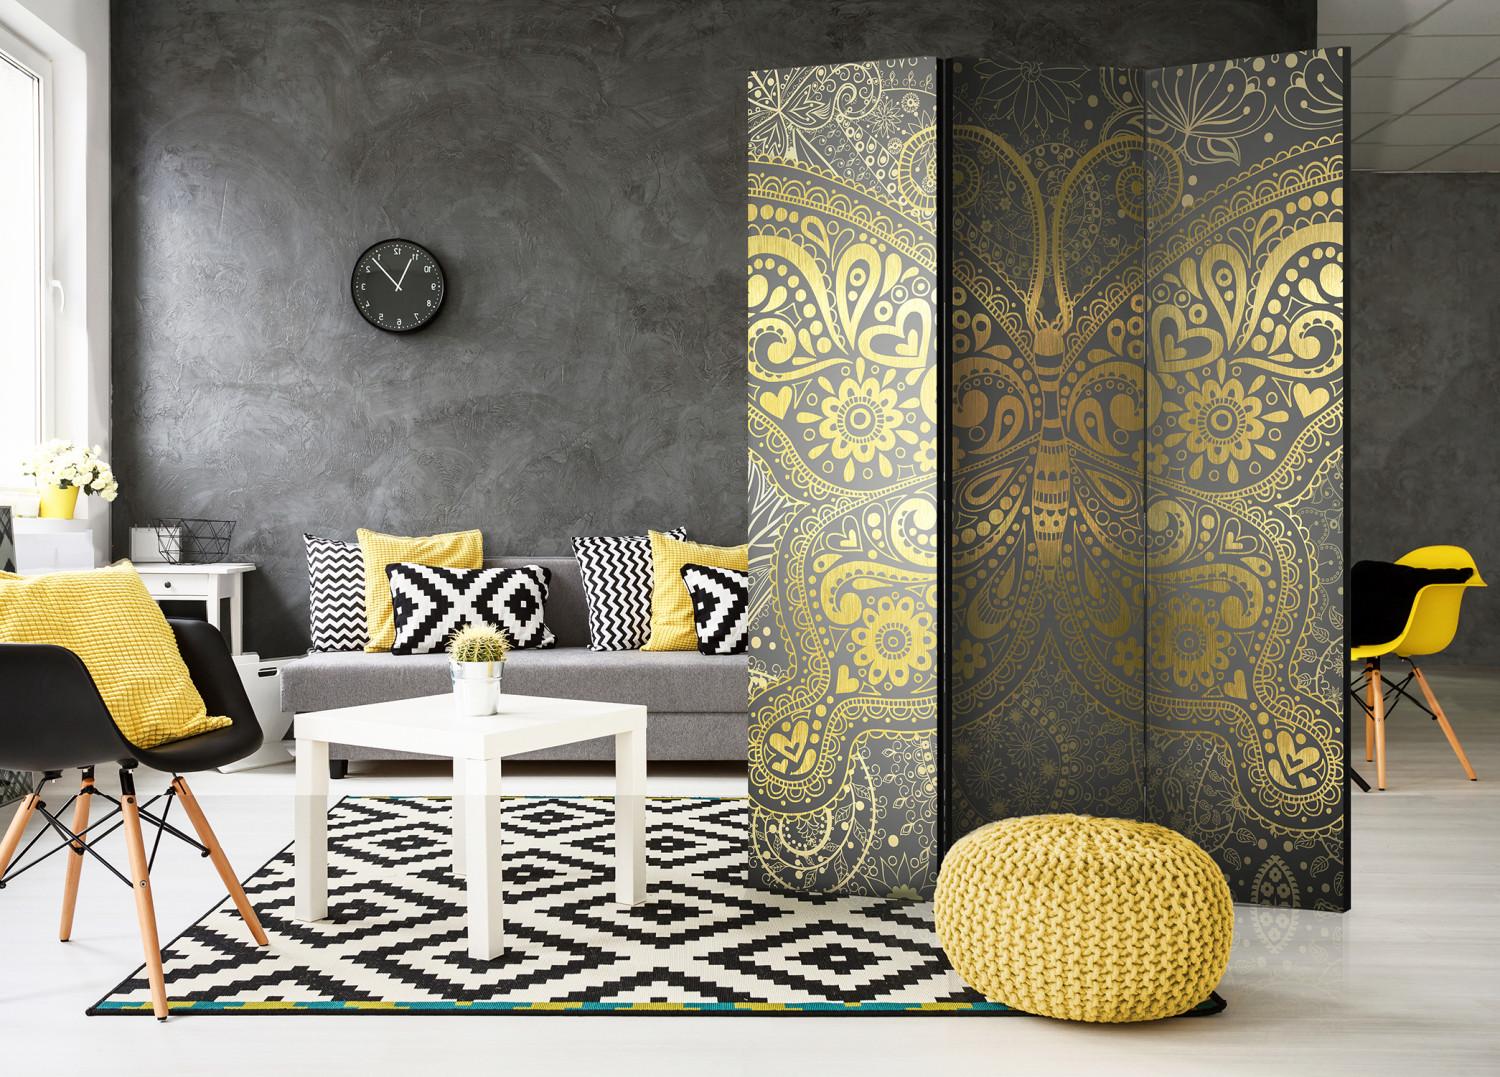 Biombo barato Golden Butterfly [Room Dividers]